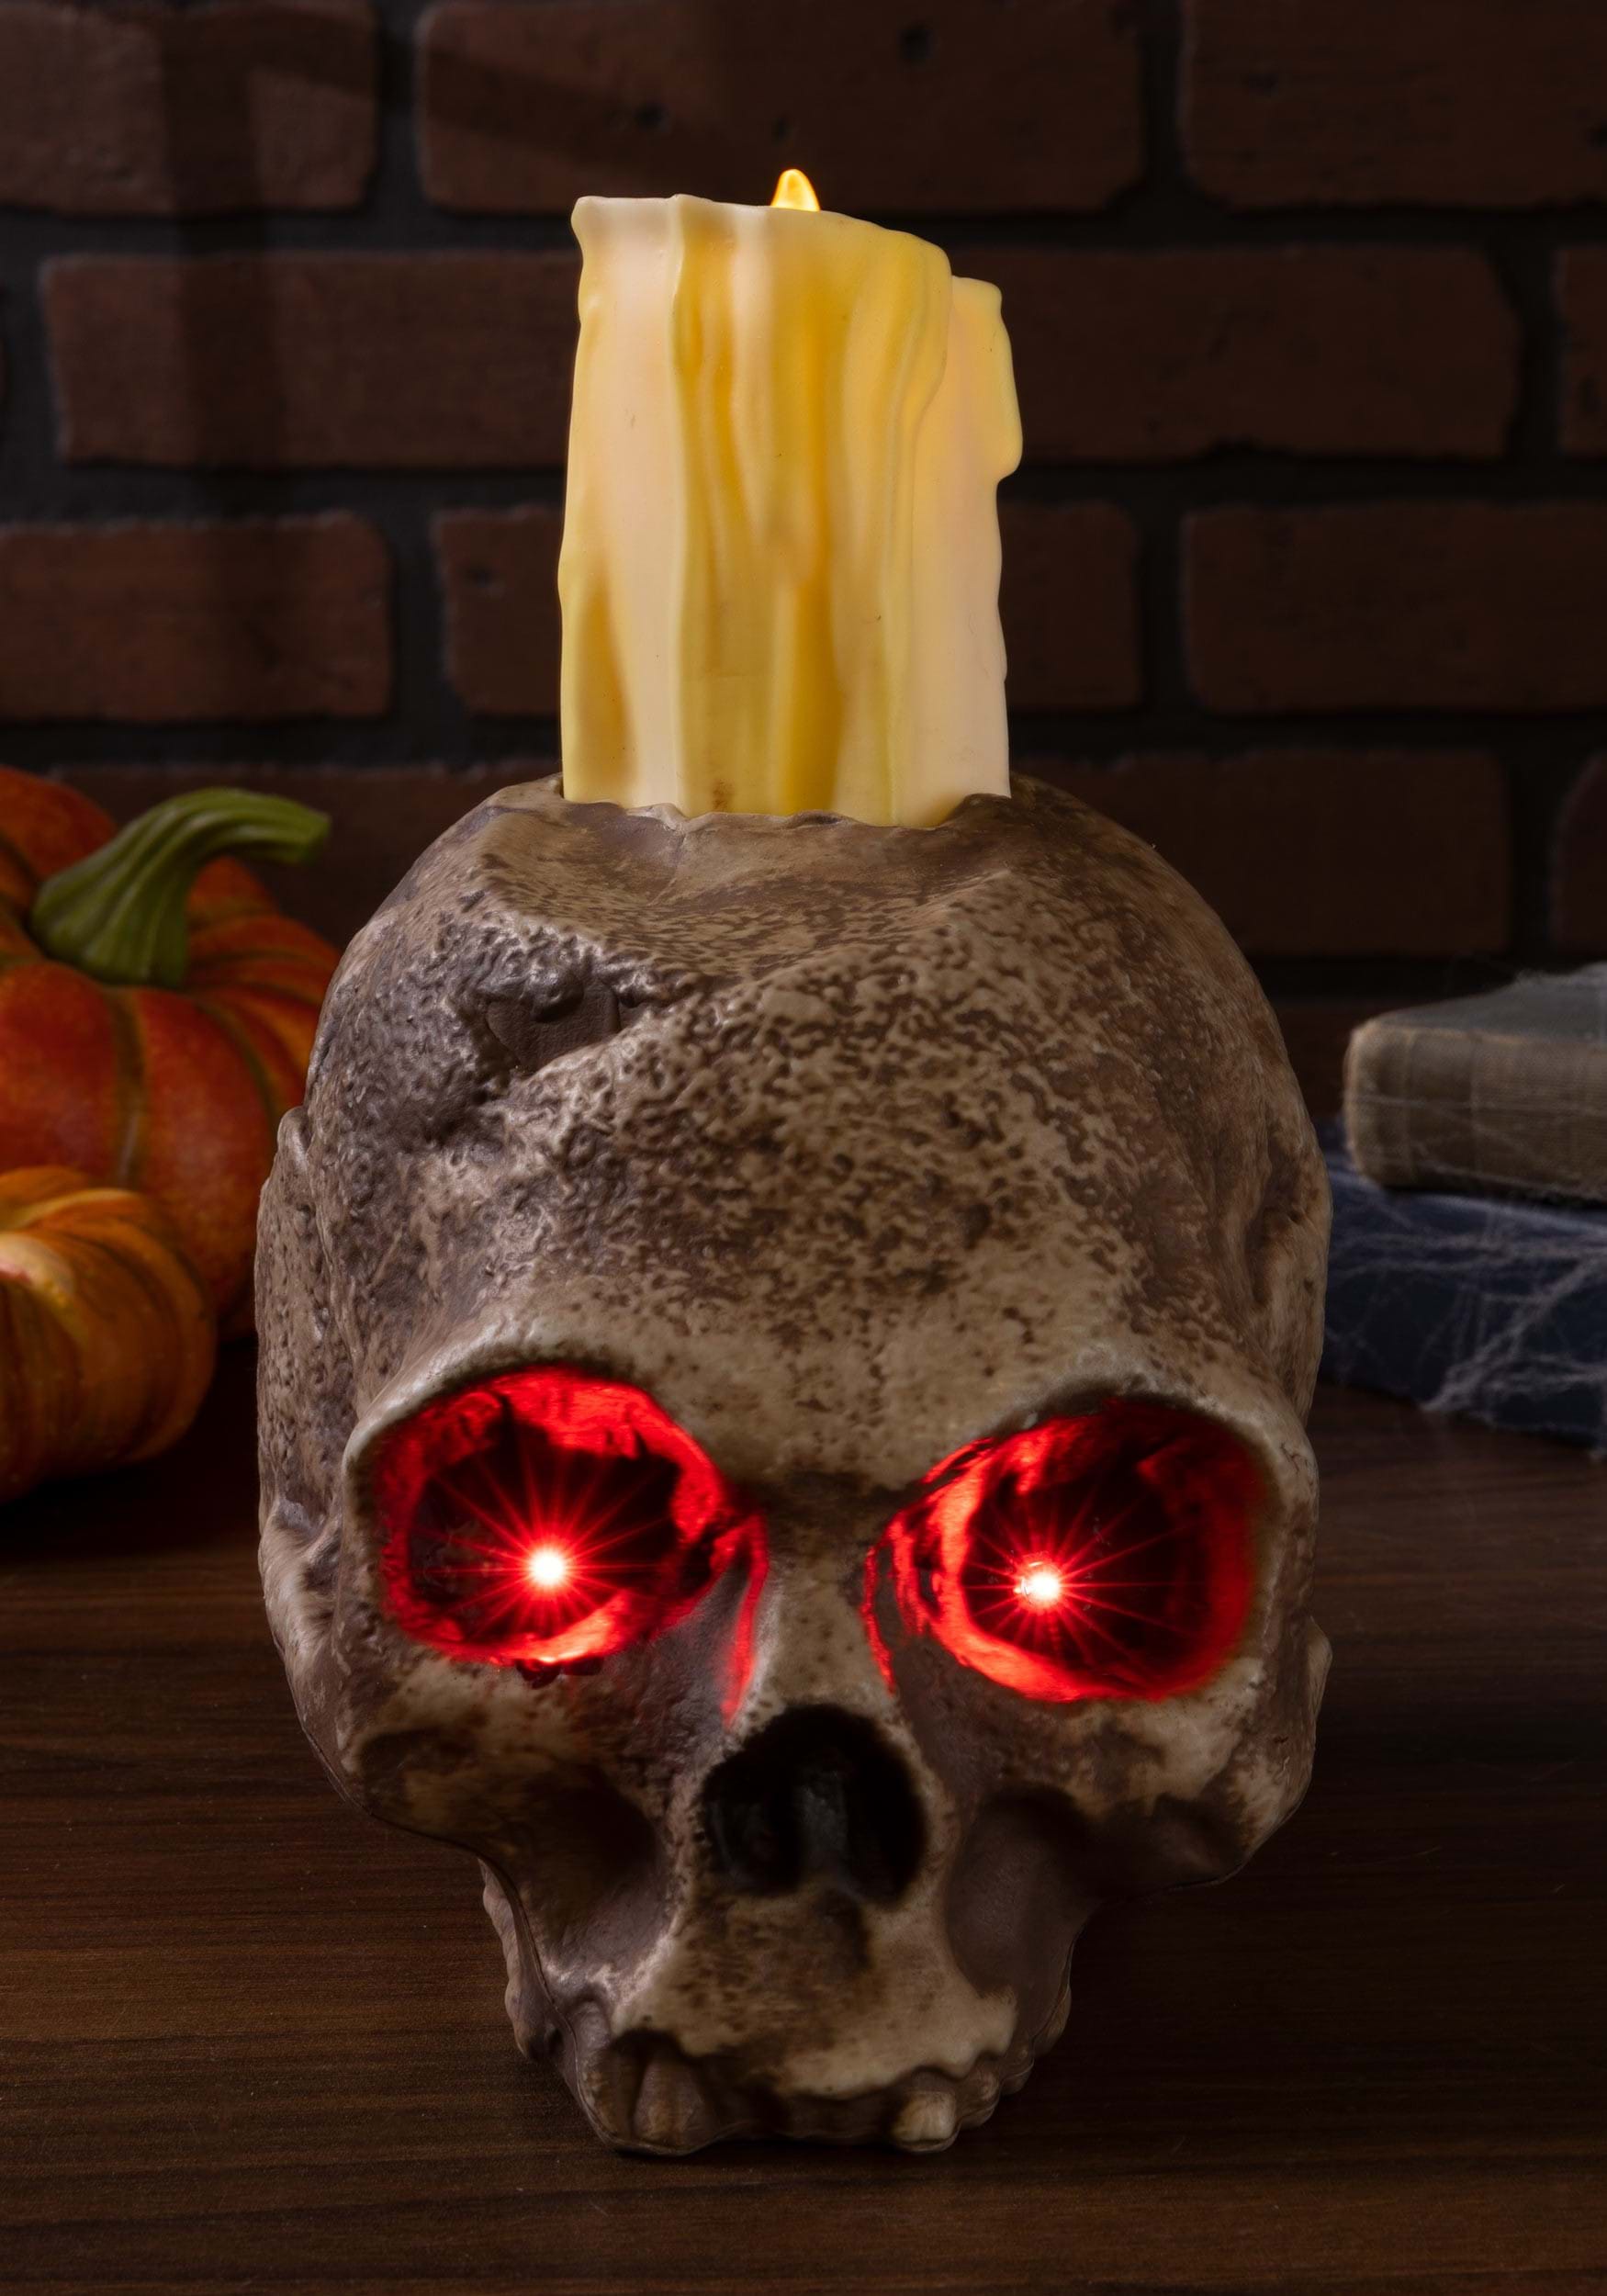 Fun Costumes Ancient Skull Candle Decoration with Red Light Up Eyes, Spooky Creepy Halloween Decor Flameless Battery Operated